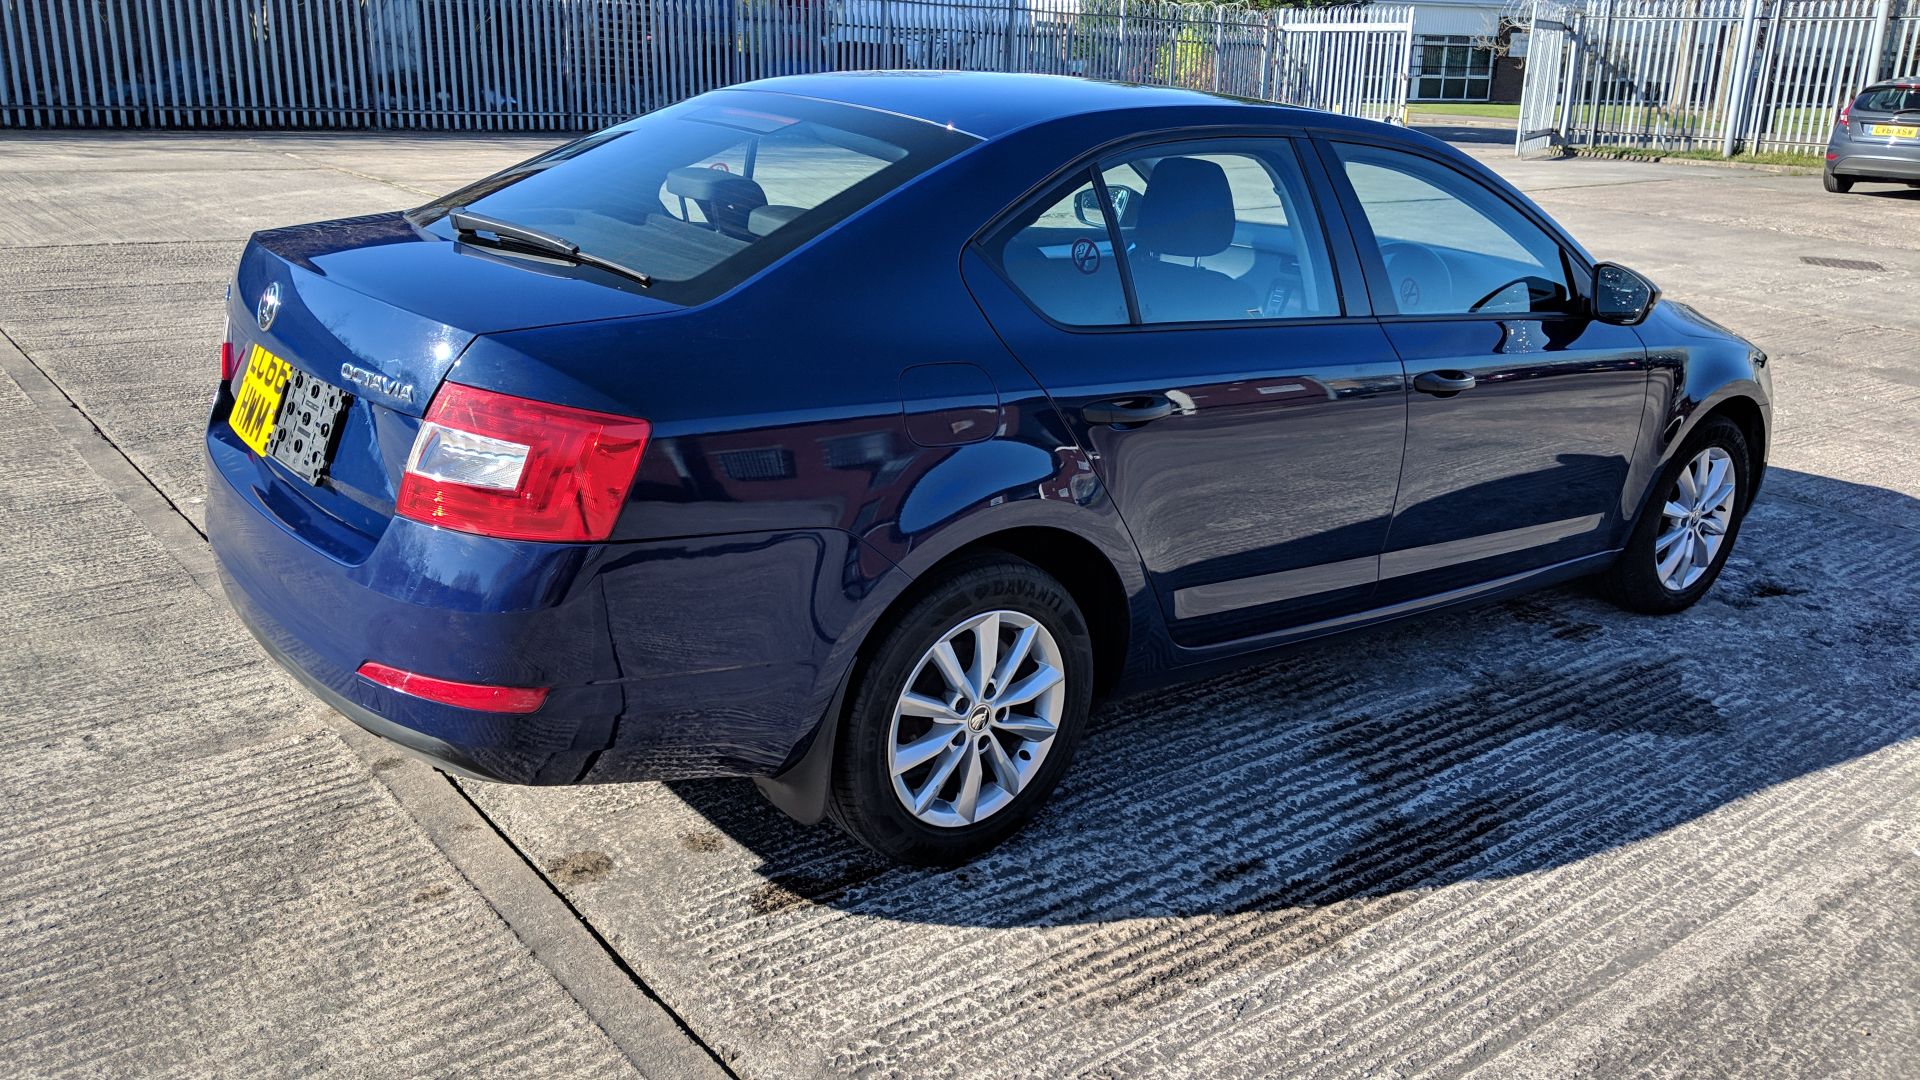 LC66 HWM Skoda Octavia S TDI S-A 1598cc diesel engine. Colour: Blue. First registered: 06.02.17. - Image 34 of 58